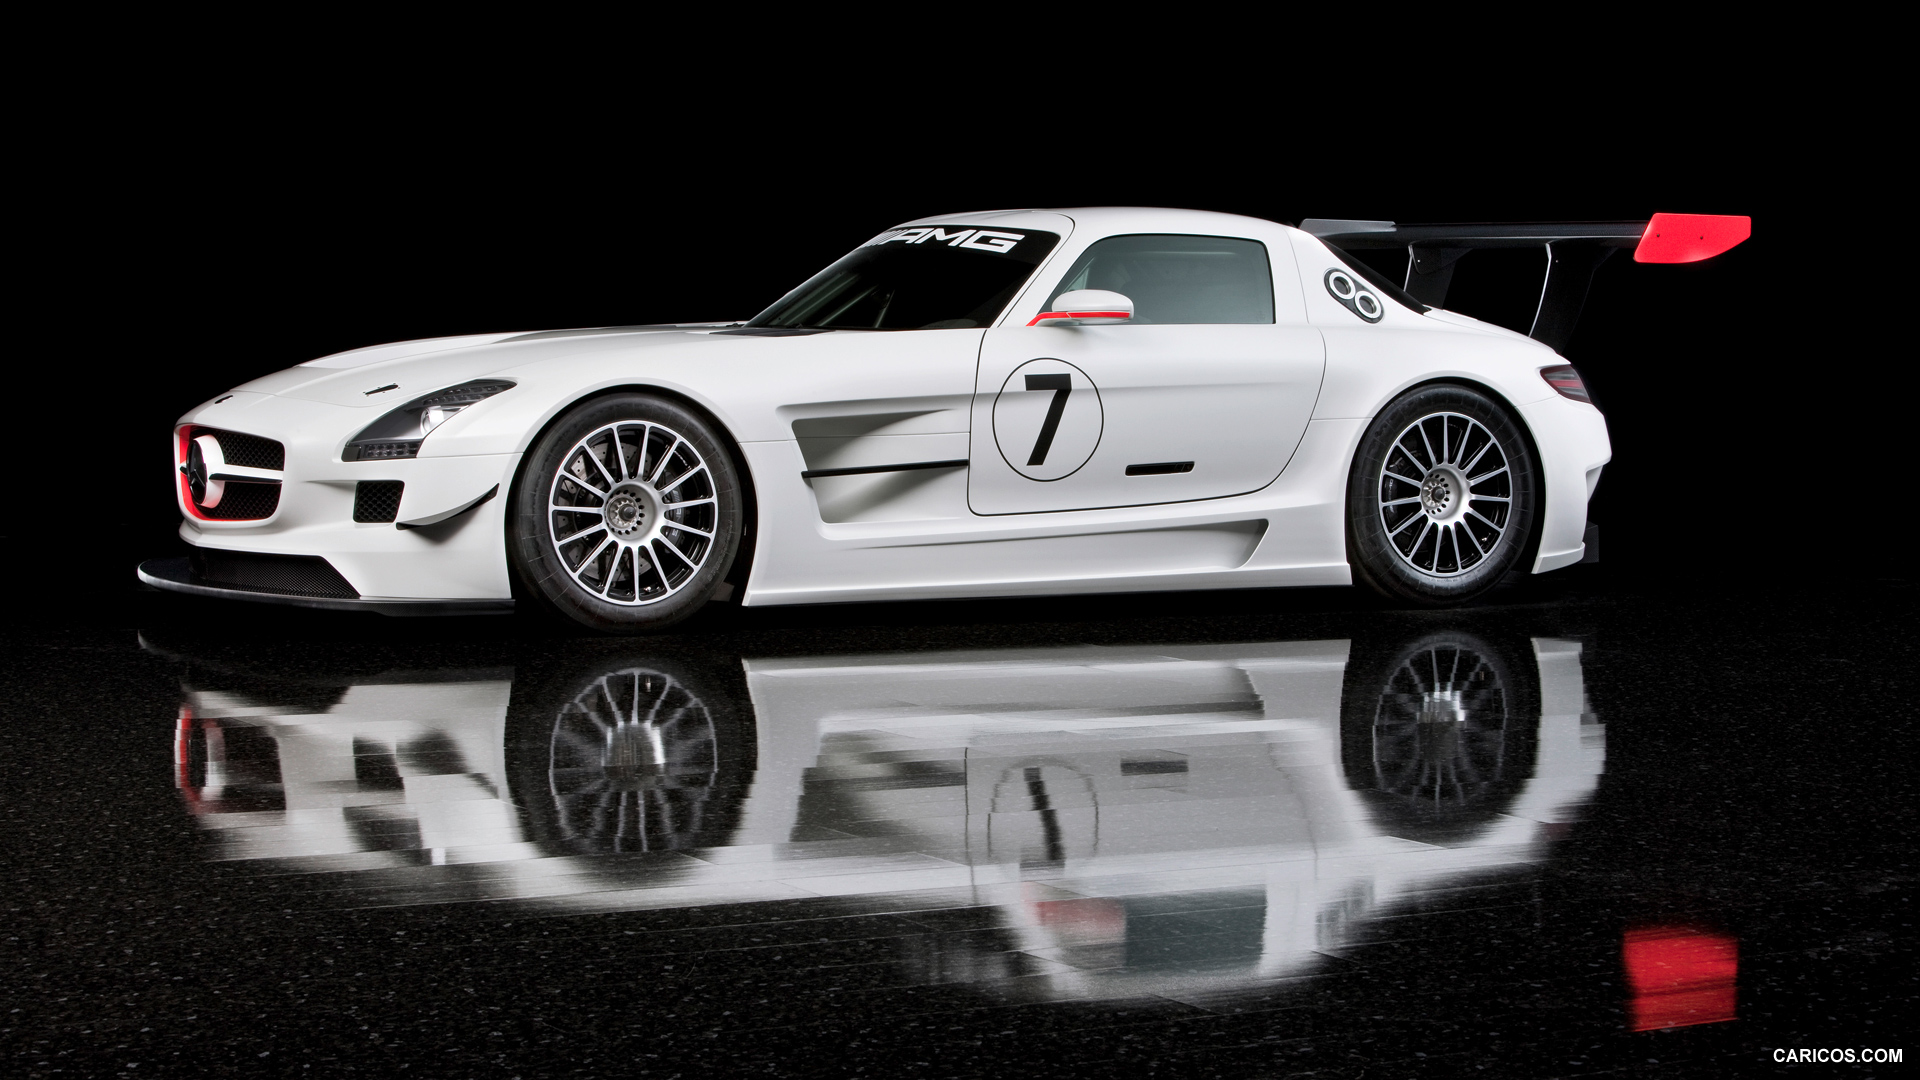 Mercedes-Benz SLS AMG GT3  - Side View Photo, #9 of 30